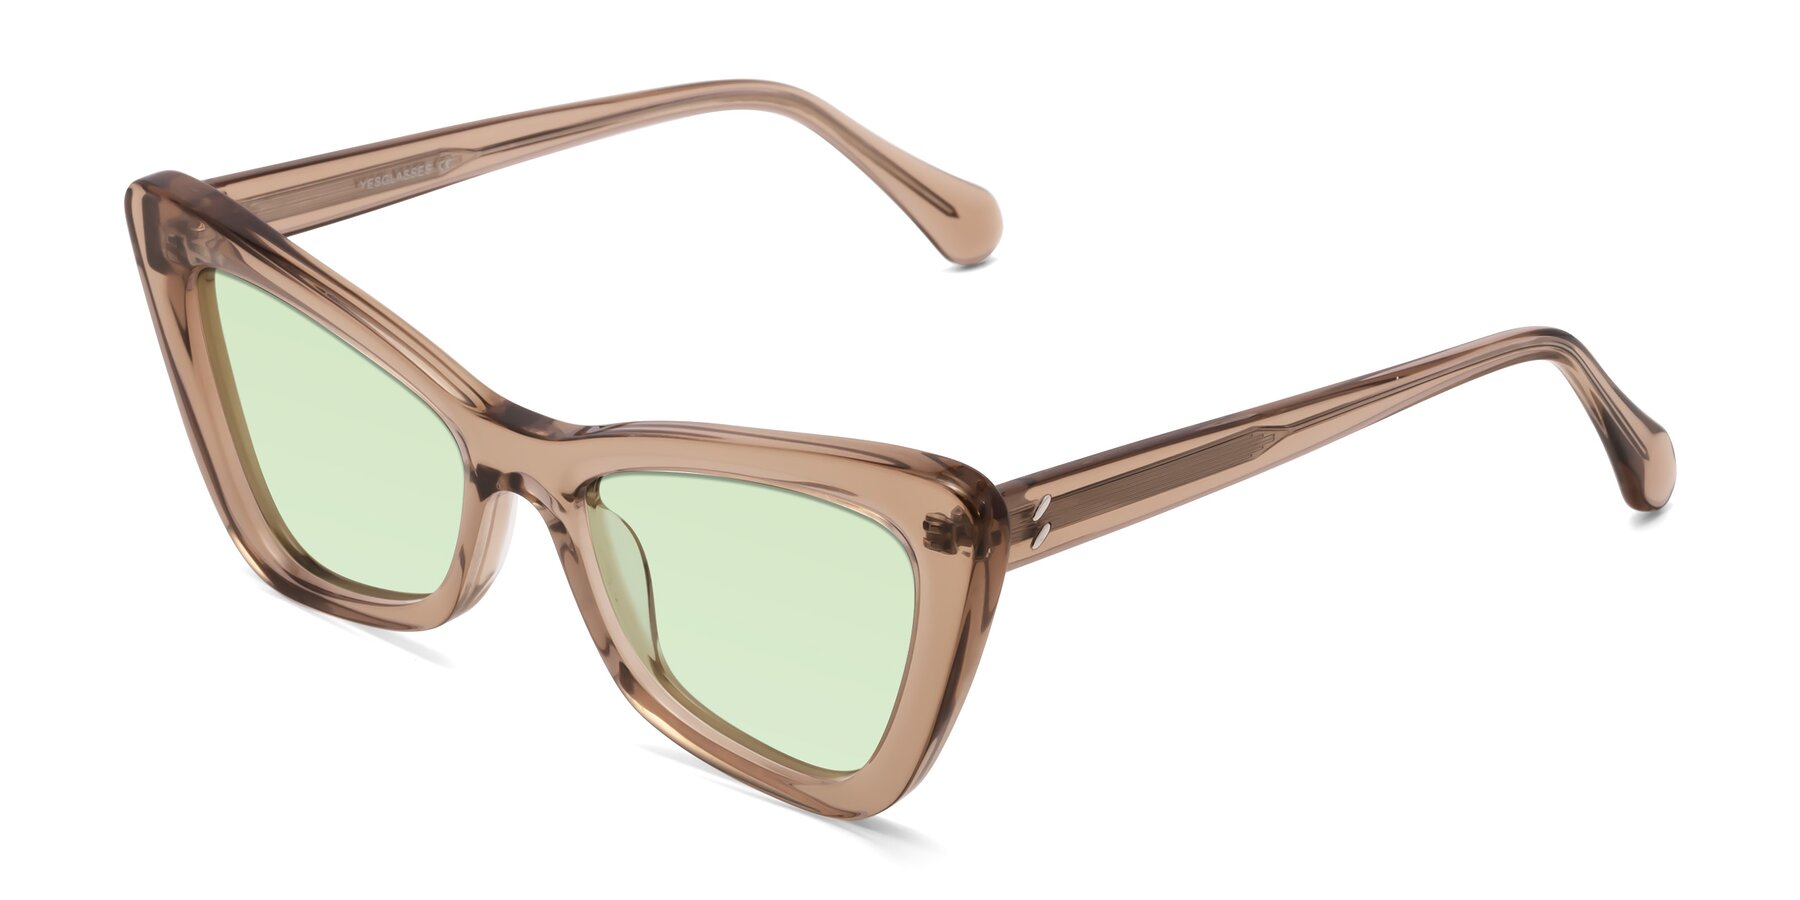 Angle of Rua in Caramel with Light Green Tinted Lenses